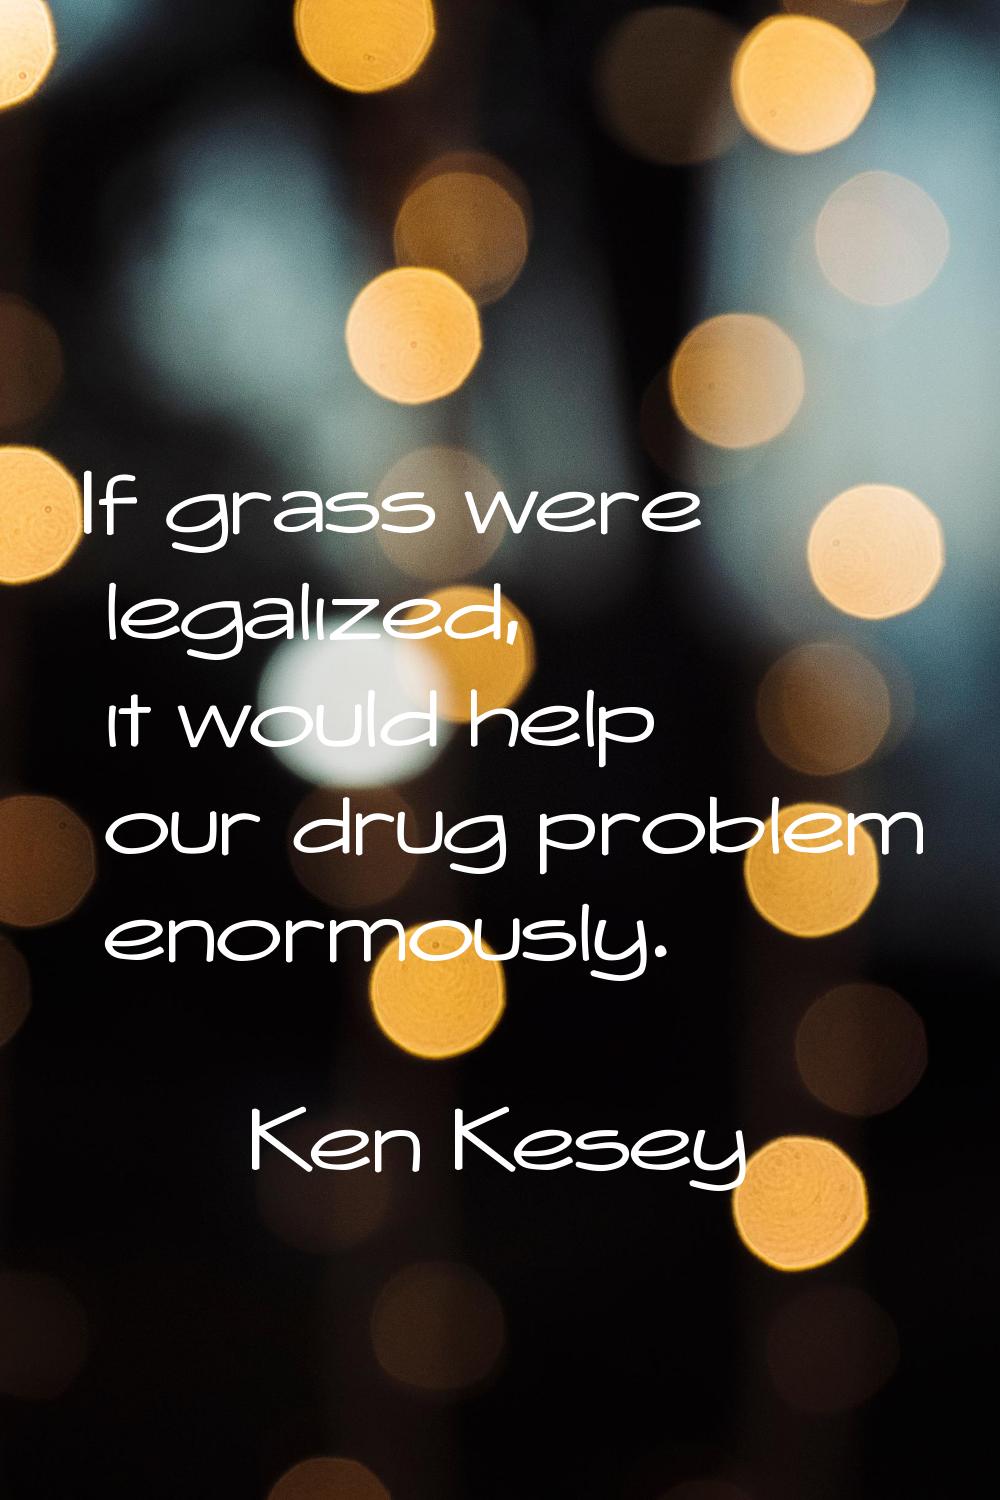 If grass were legalized, it would help our drug problem enormously.